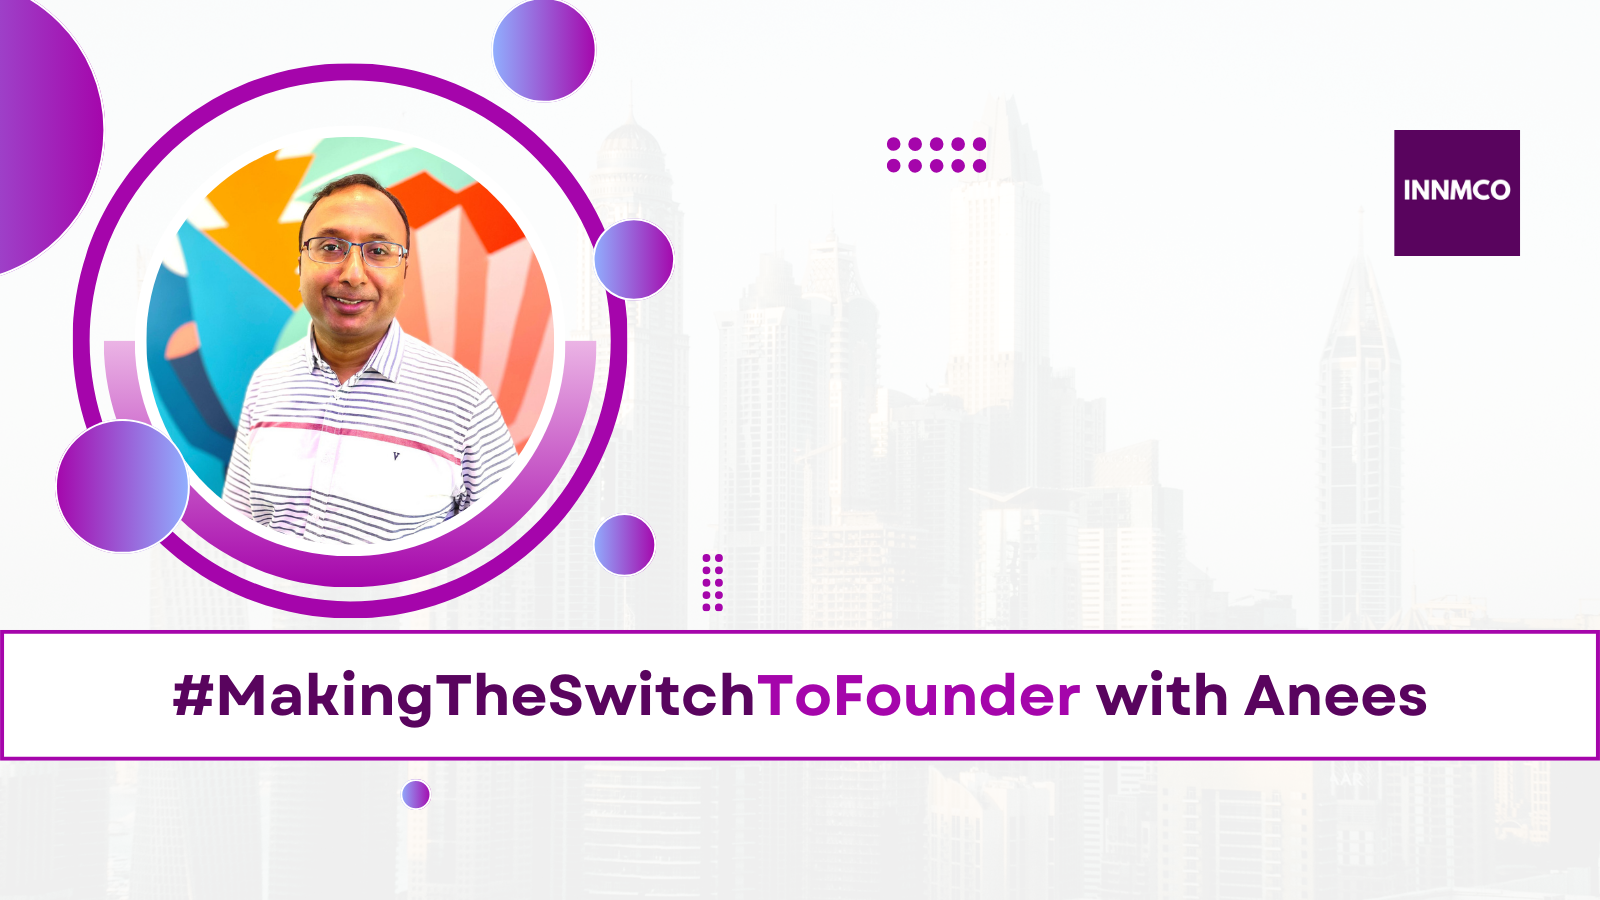 Making the Switch To Founder Newsletter.